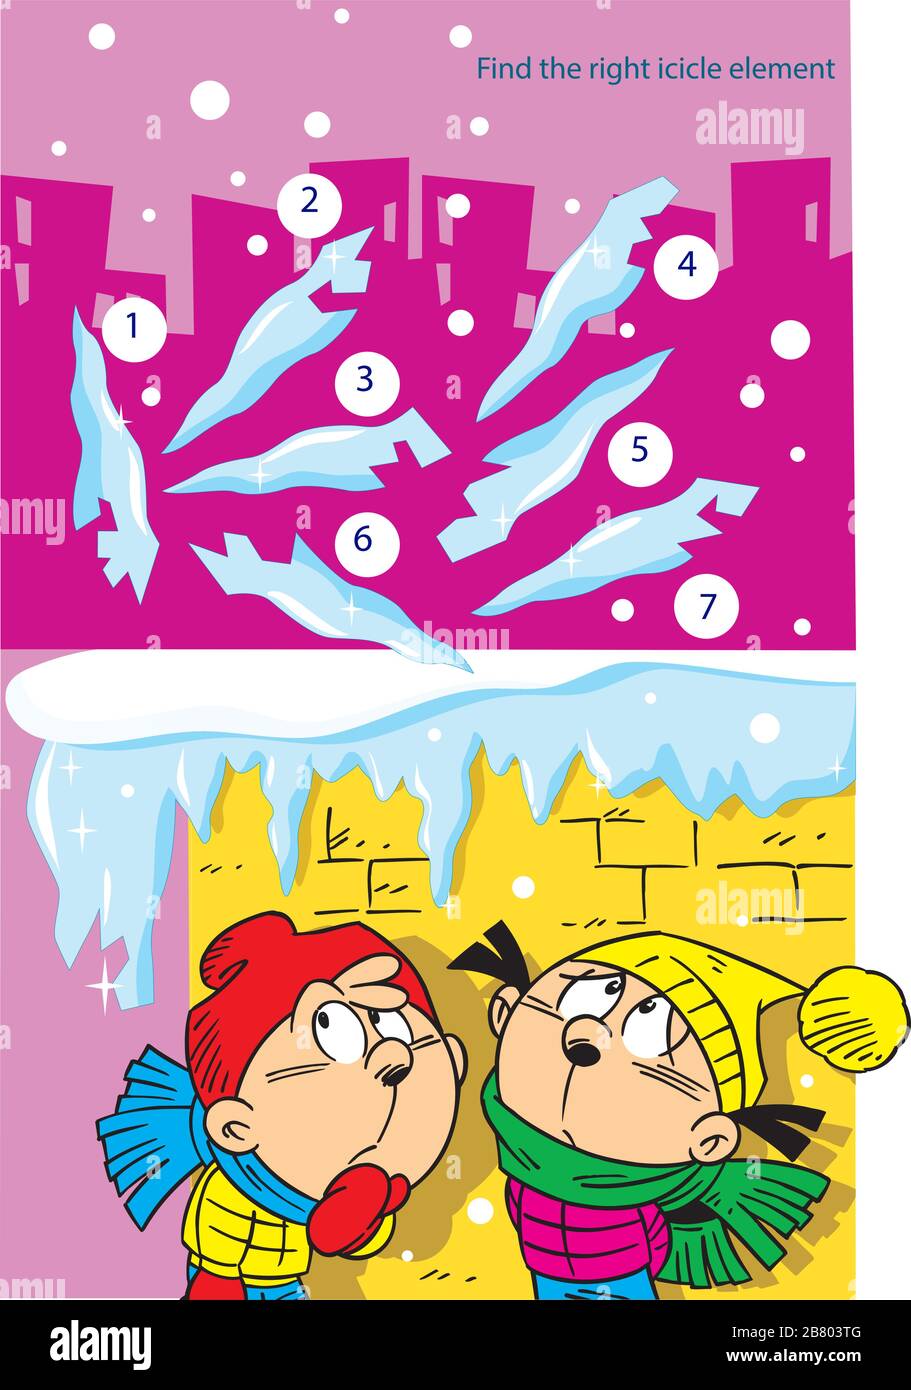 Vector illustration with a puzzle in which you need to find the right icicle fragment from the roof Stock Vector